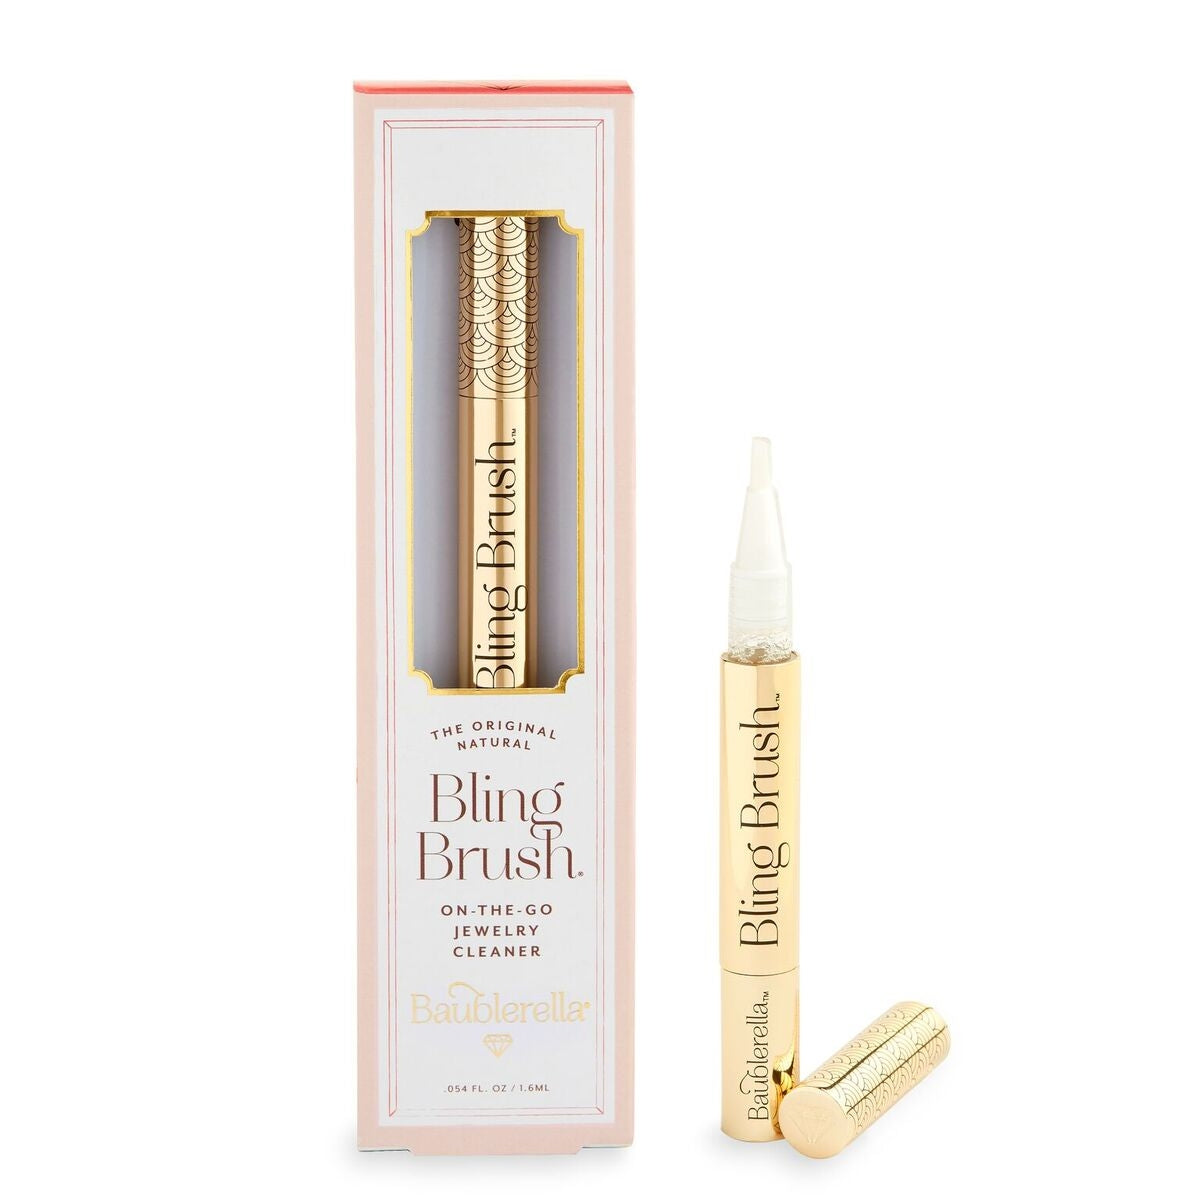 Bling Brush - On-the-go Jewelry Cleaner